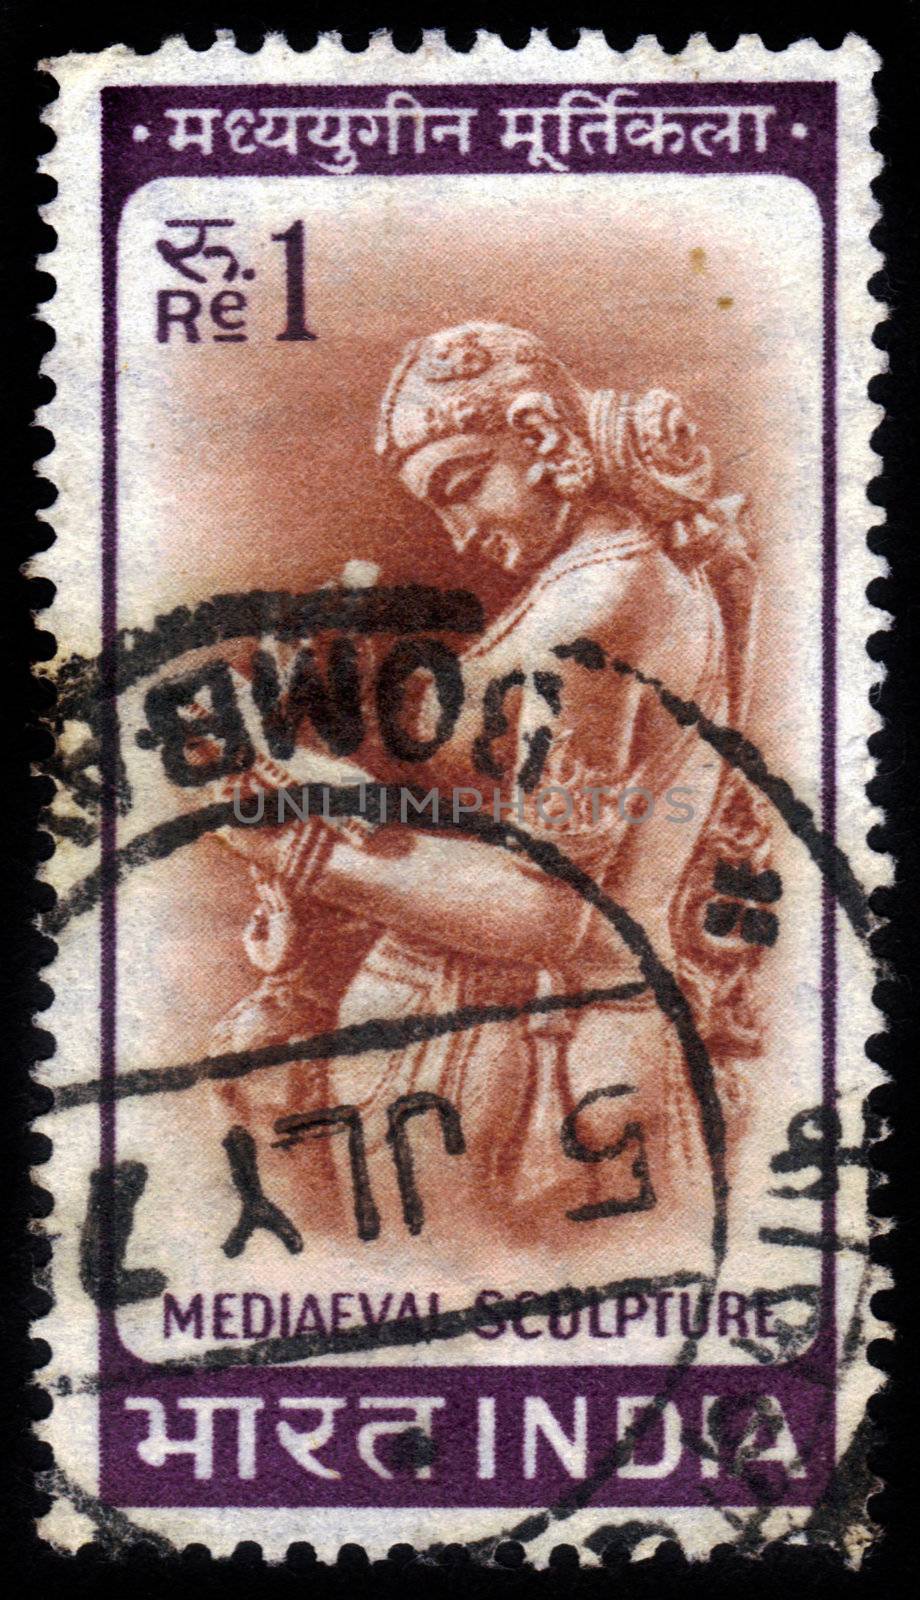 INDIA - CIRCA 1965: A stamp printed in India shows image of a medieval sculpture from the Parshwanath Jain Temple of Khajuraho, circa 1965